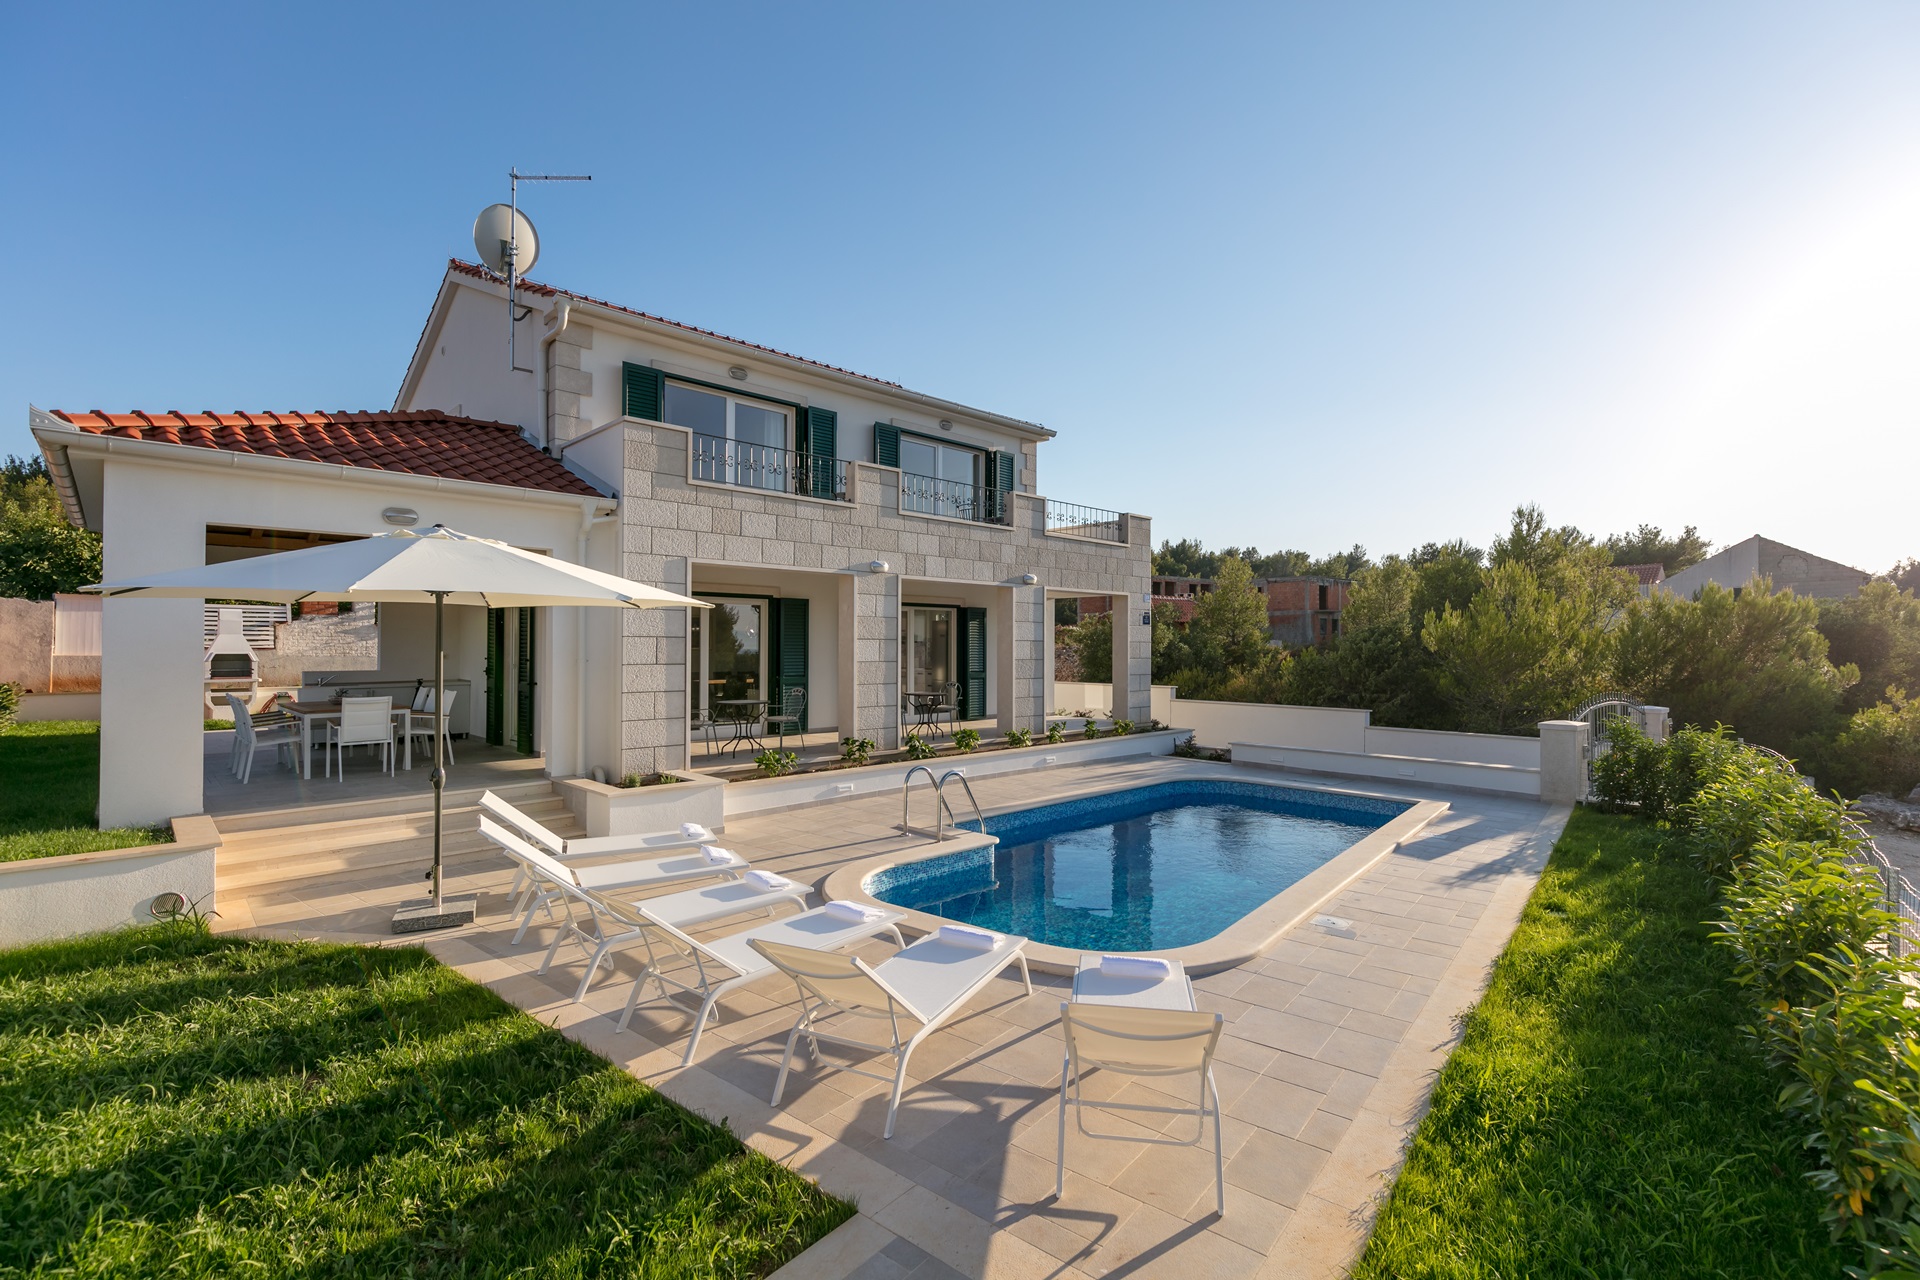 Villa Makarac with private swimming pool and garden for renting on the island of Brac